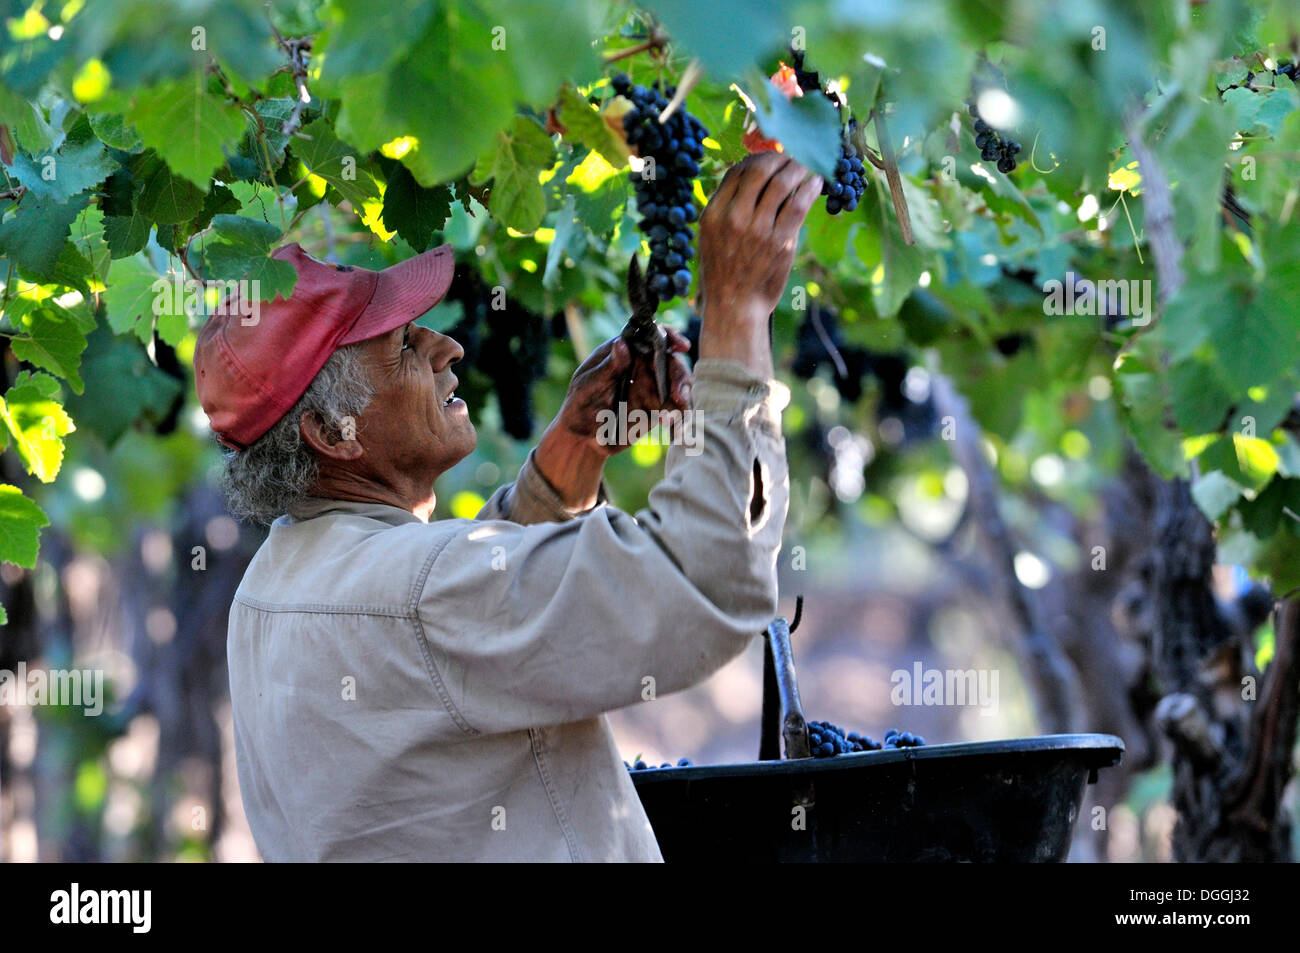 Picker during the vintage of Syrah grapes on the Carinae vineyard in Maipu, Mendoza Province, Argentina, South America Stock Photo